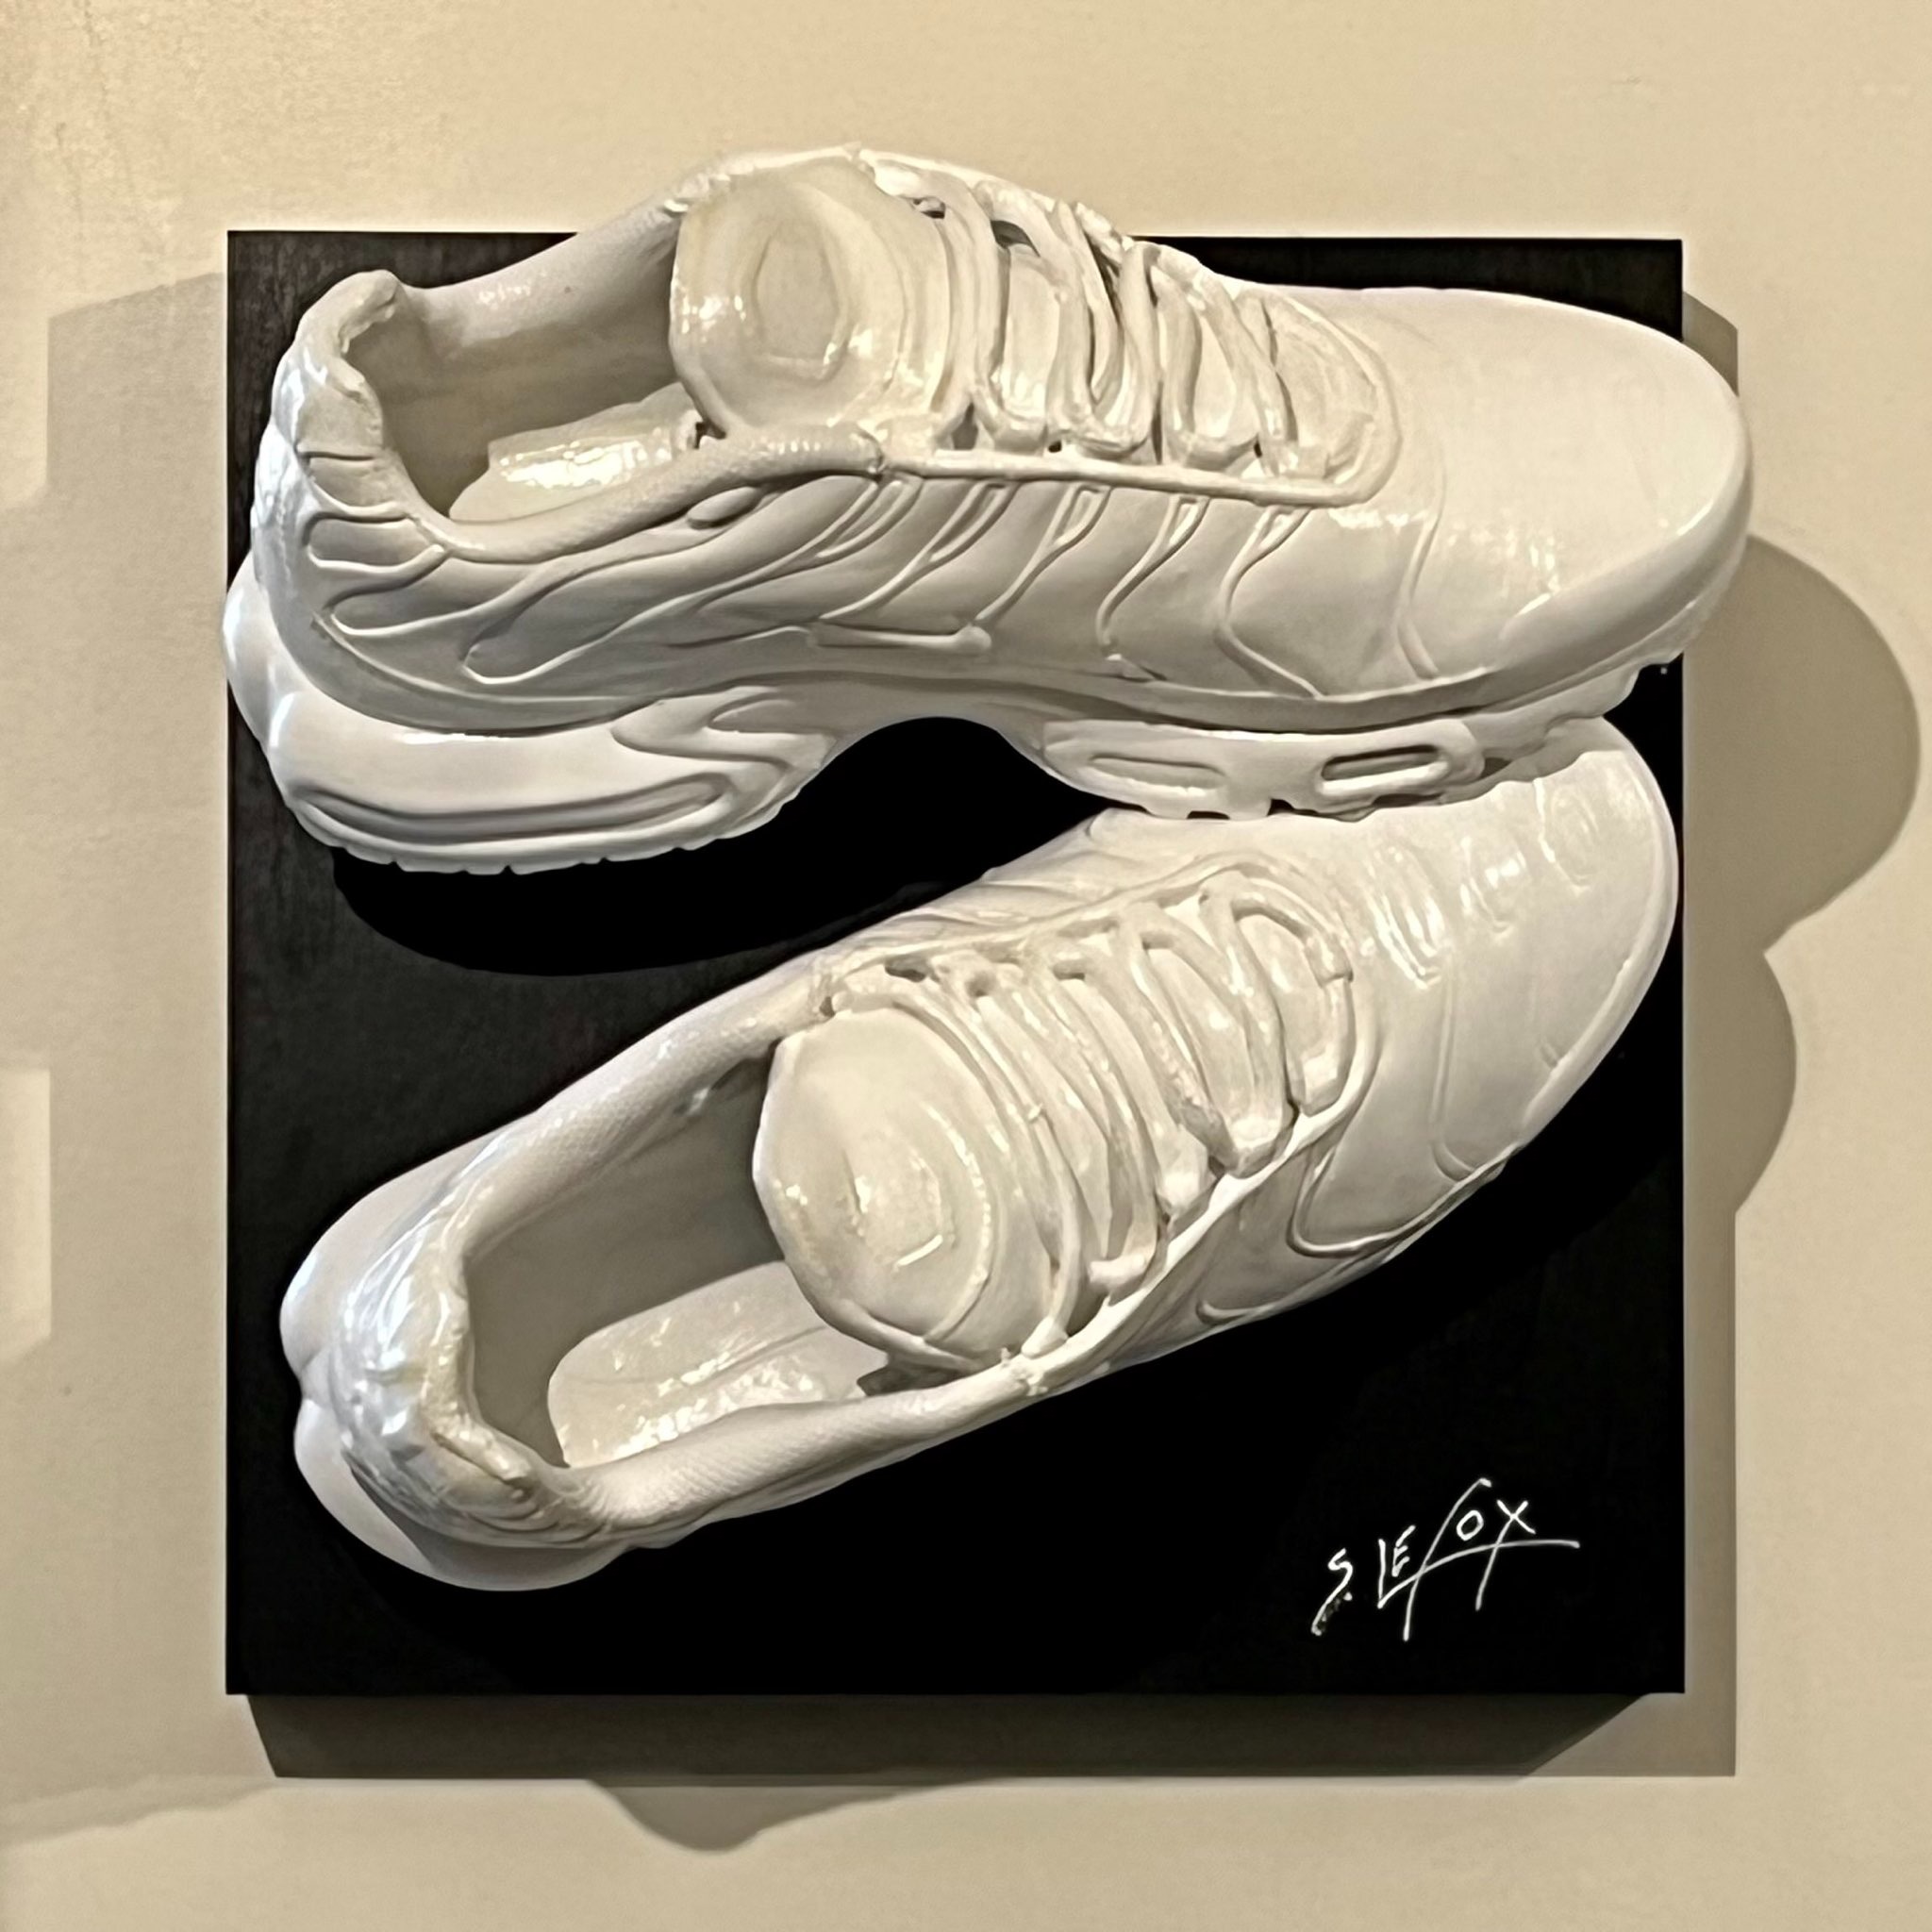 BLANC IMMACULE</br>Acrylic on Nike Air Max Tuned, wooden box 30 X 30 X 20 SBD 